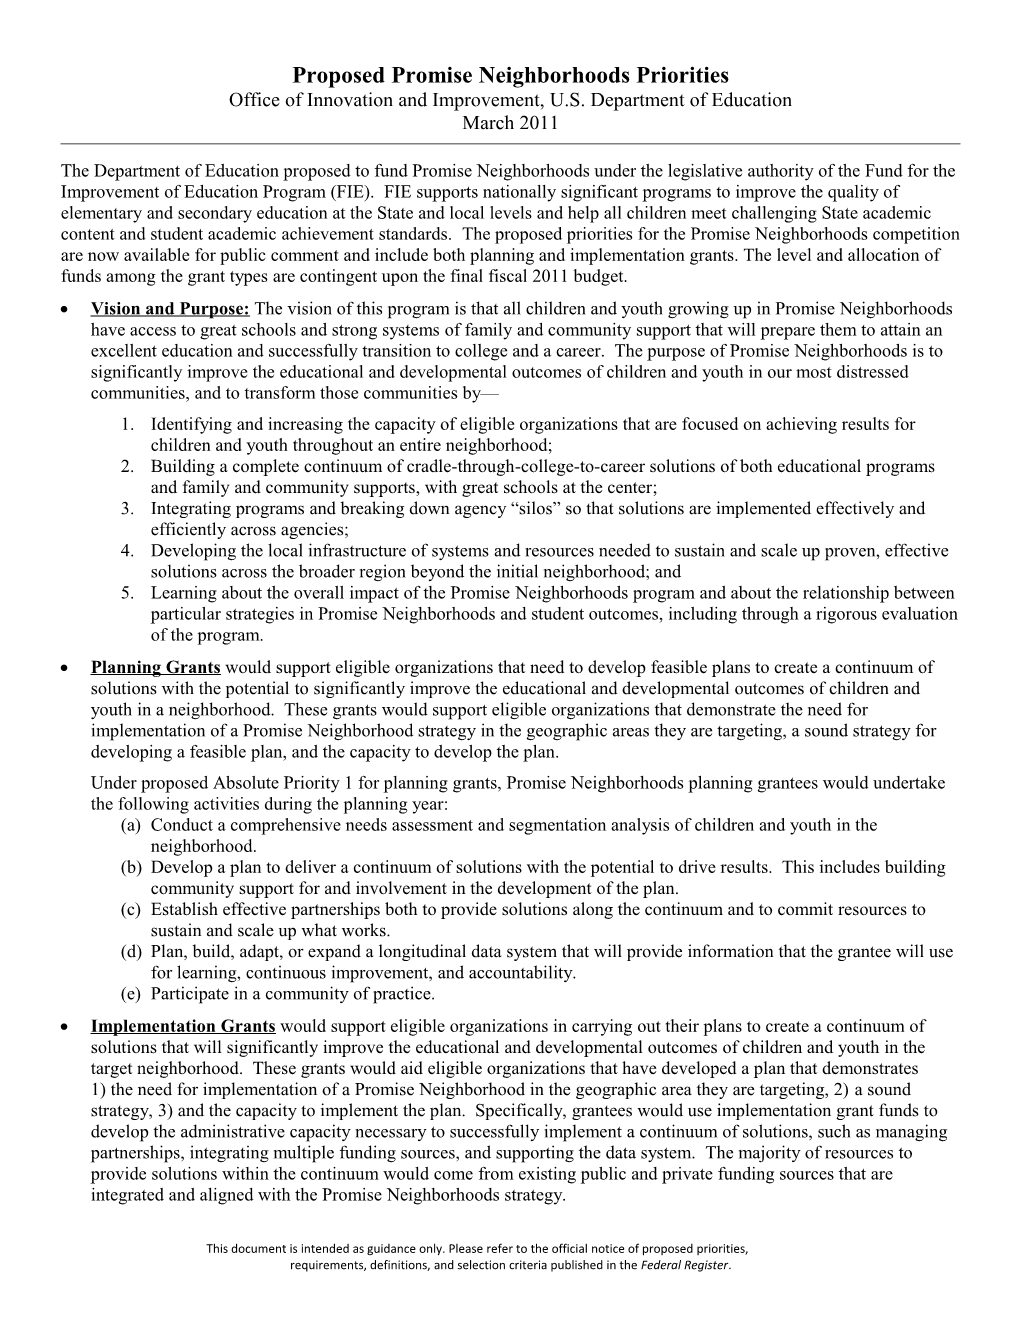 FY2011 Promise Neighborhoods Notice of Proposed Priorities At-A-Glance (MS Word)